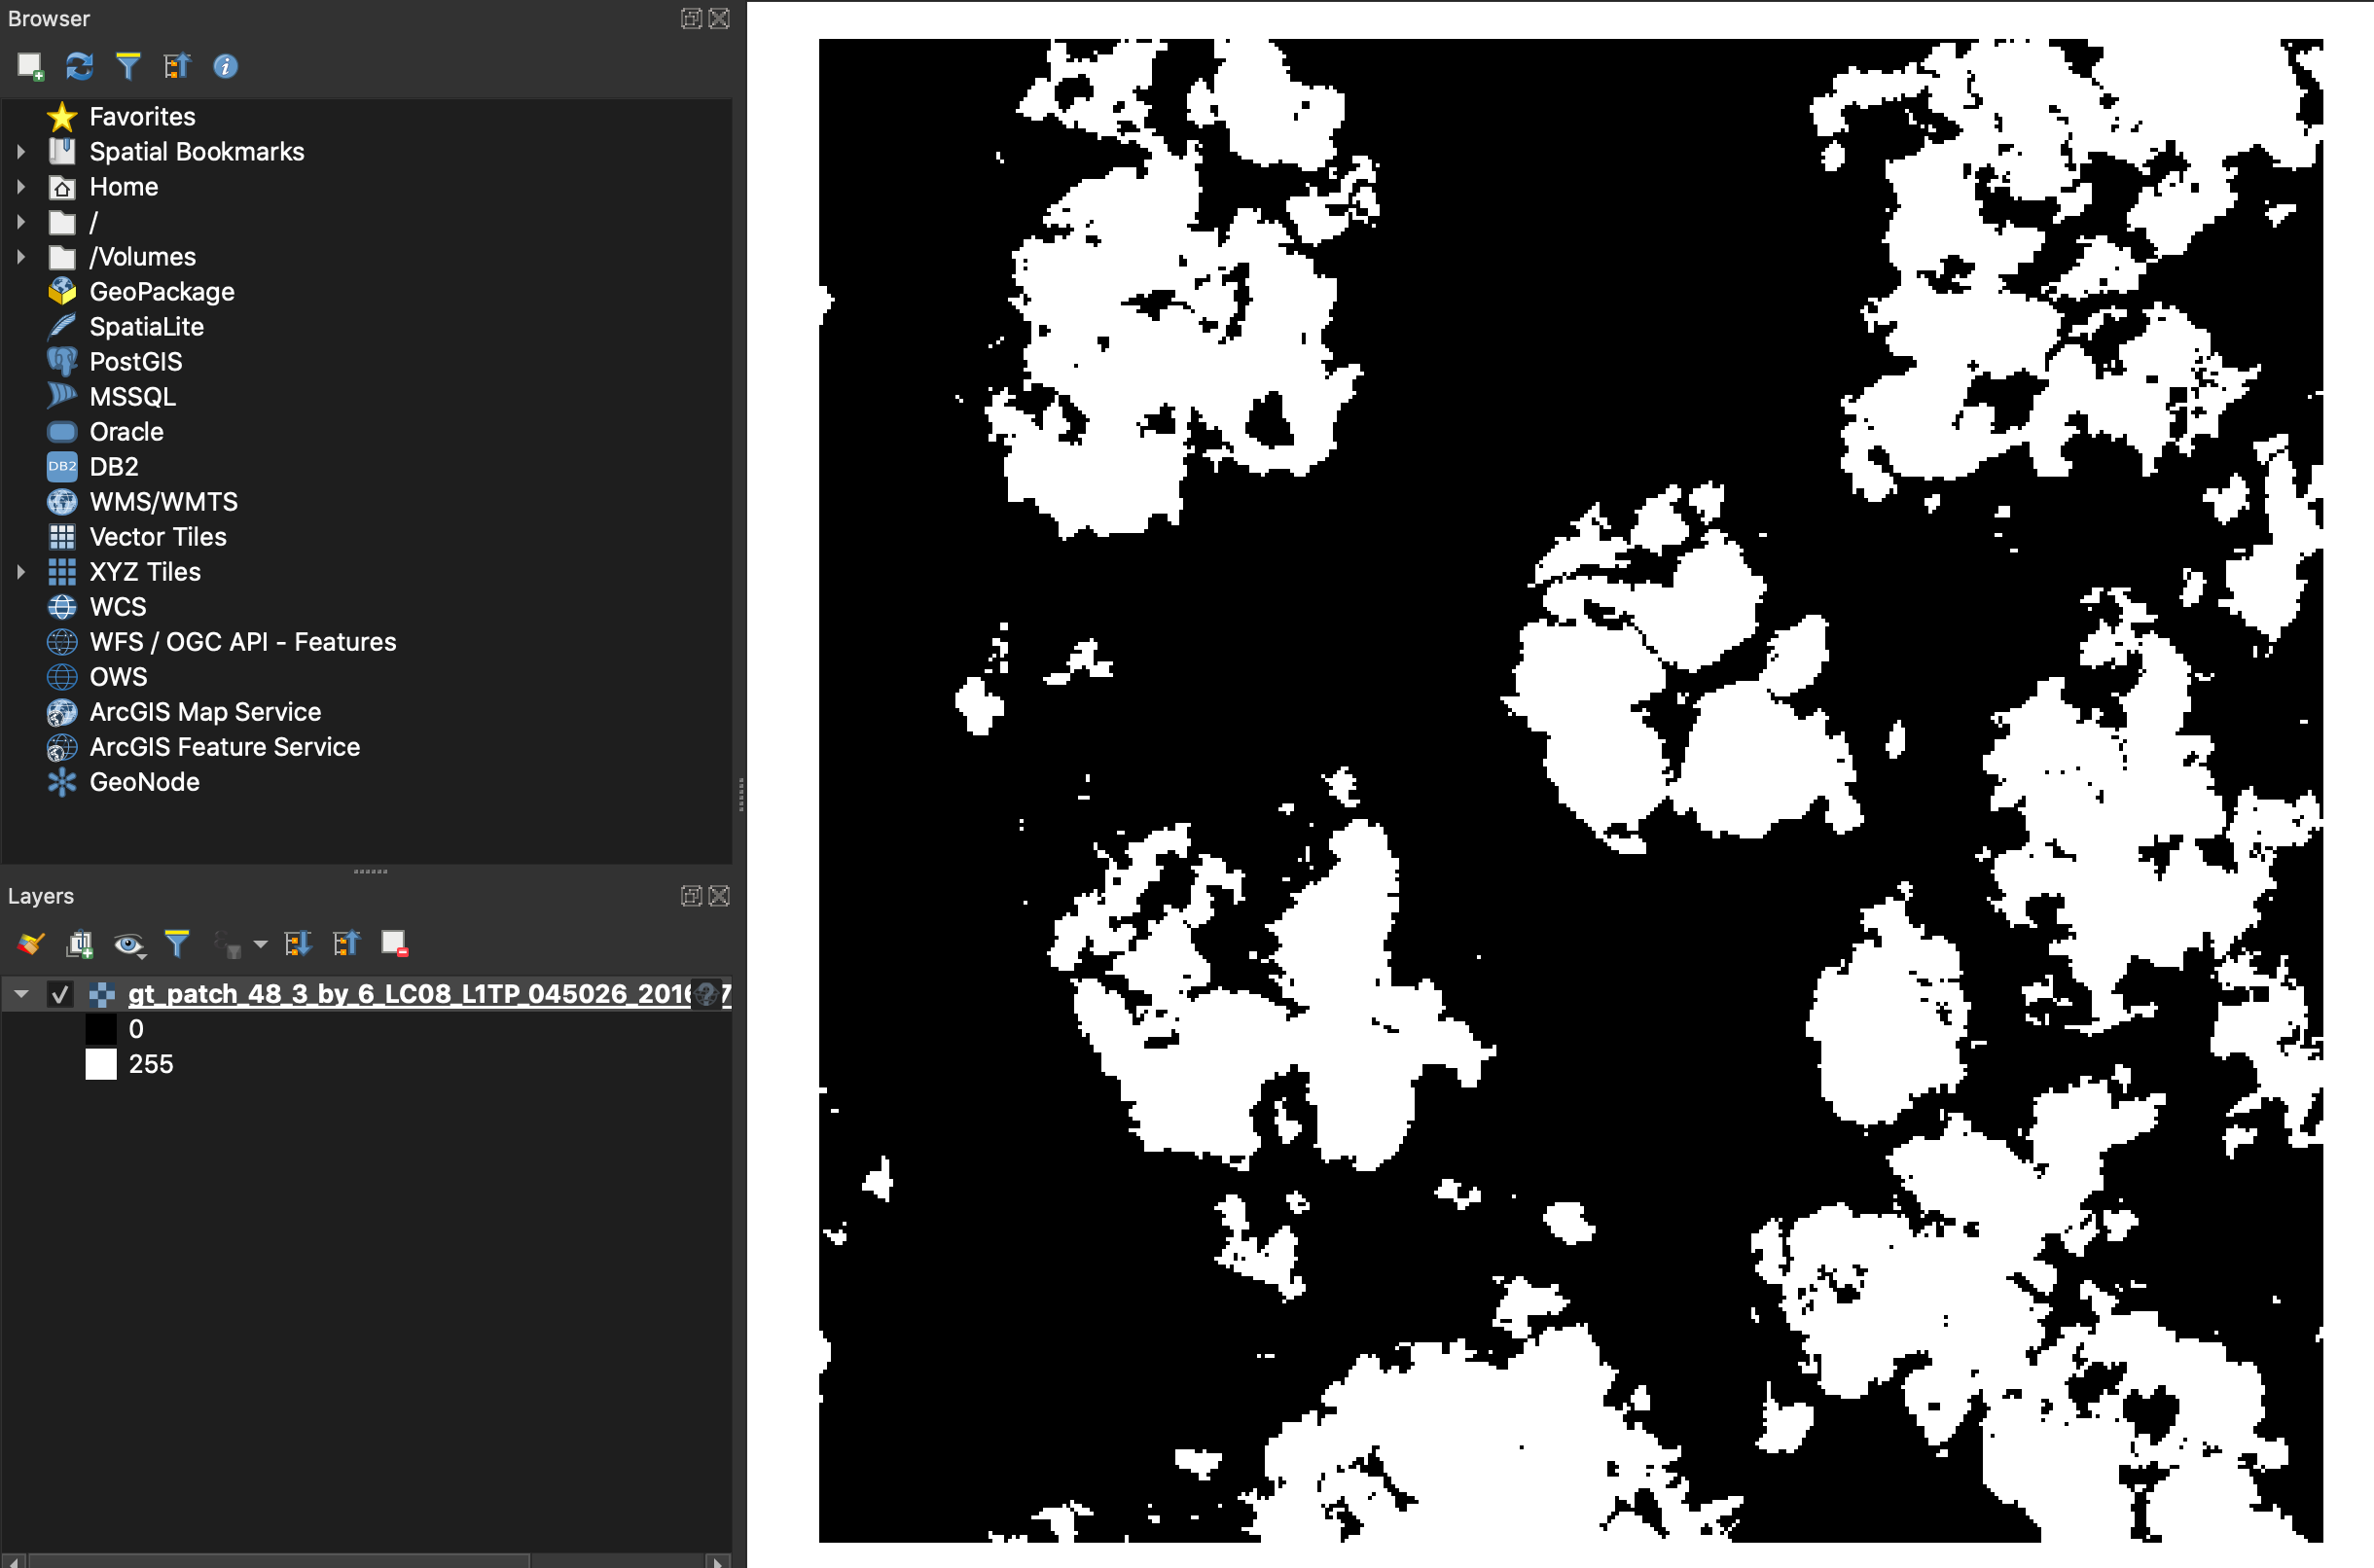 Image by author: patch image from [Cloud Segmentation Dataset](https://github.com/SorourMo/38-Cloud-A-Cloud-Segmentation-Dataset) visualized in QGIS